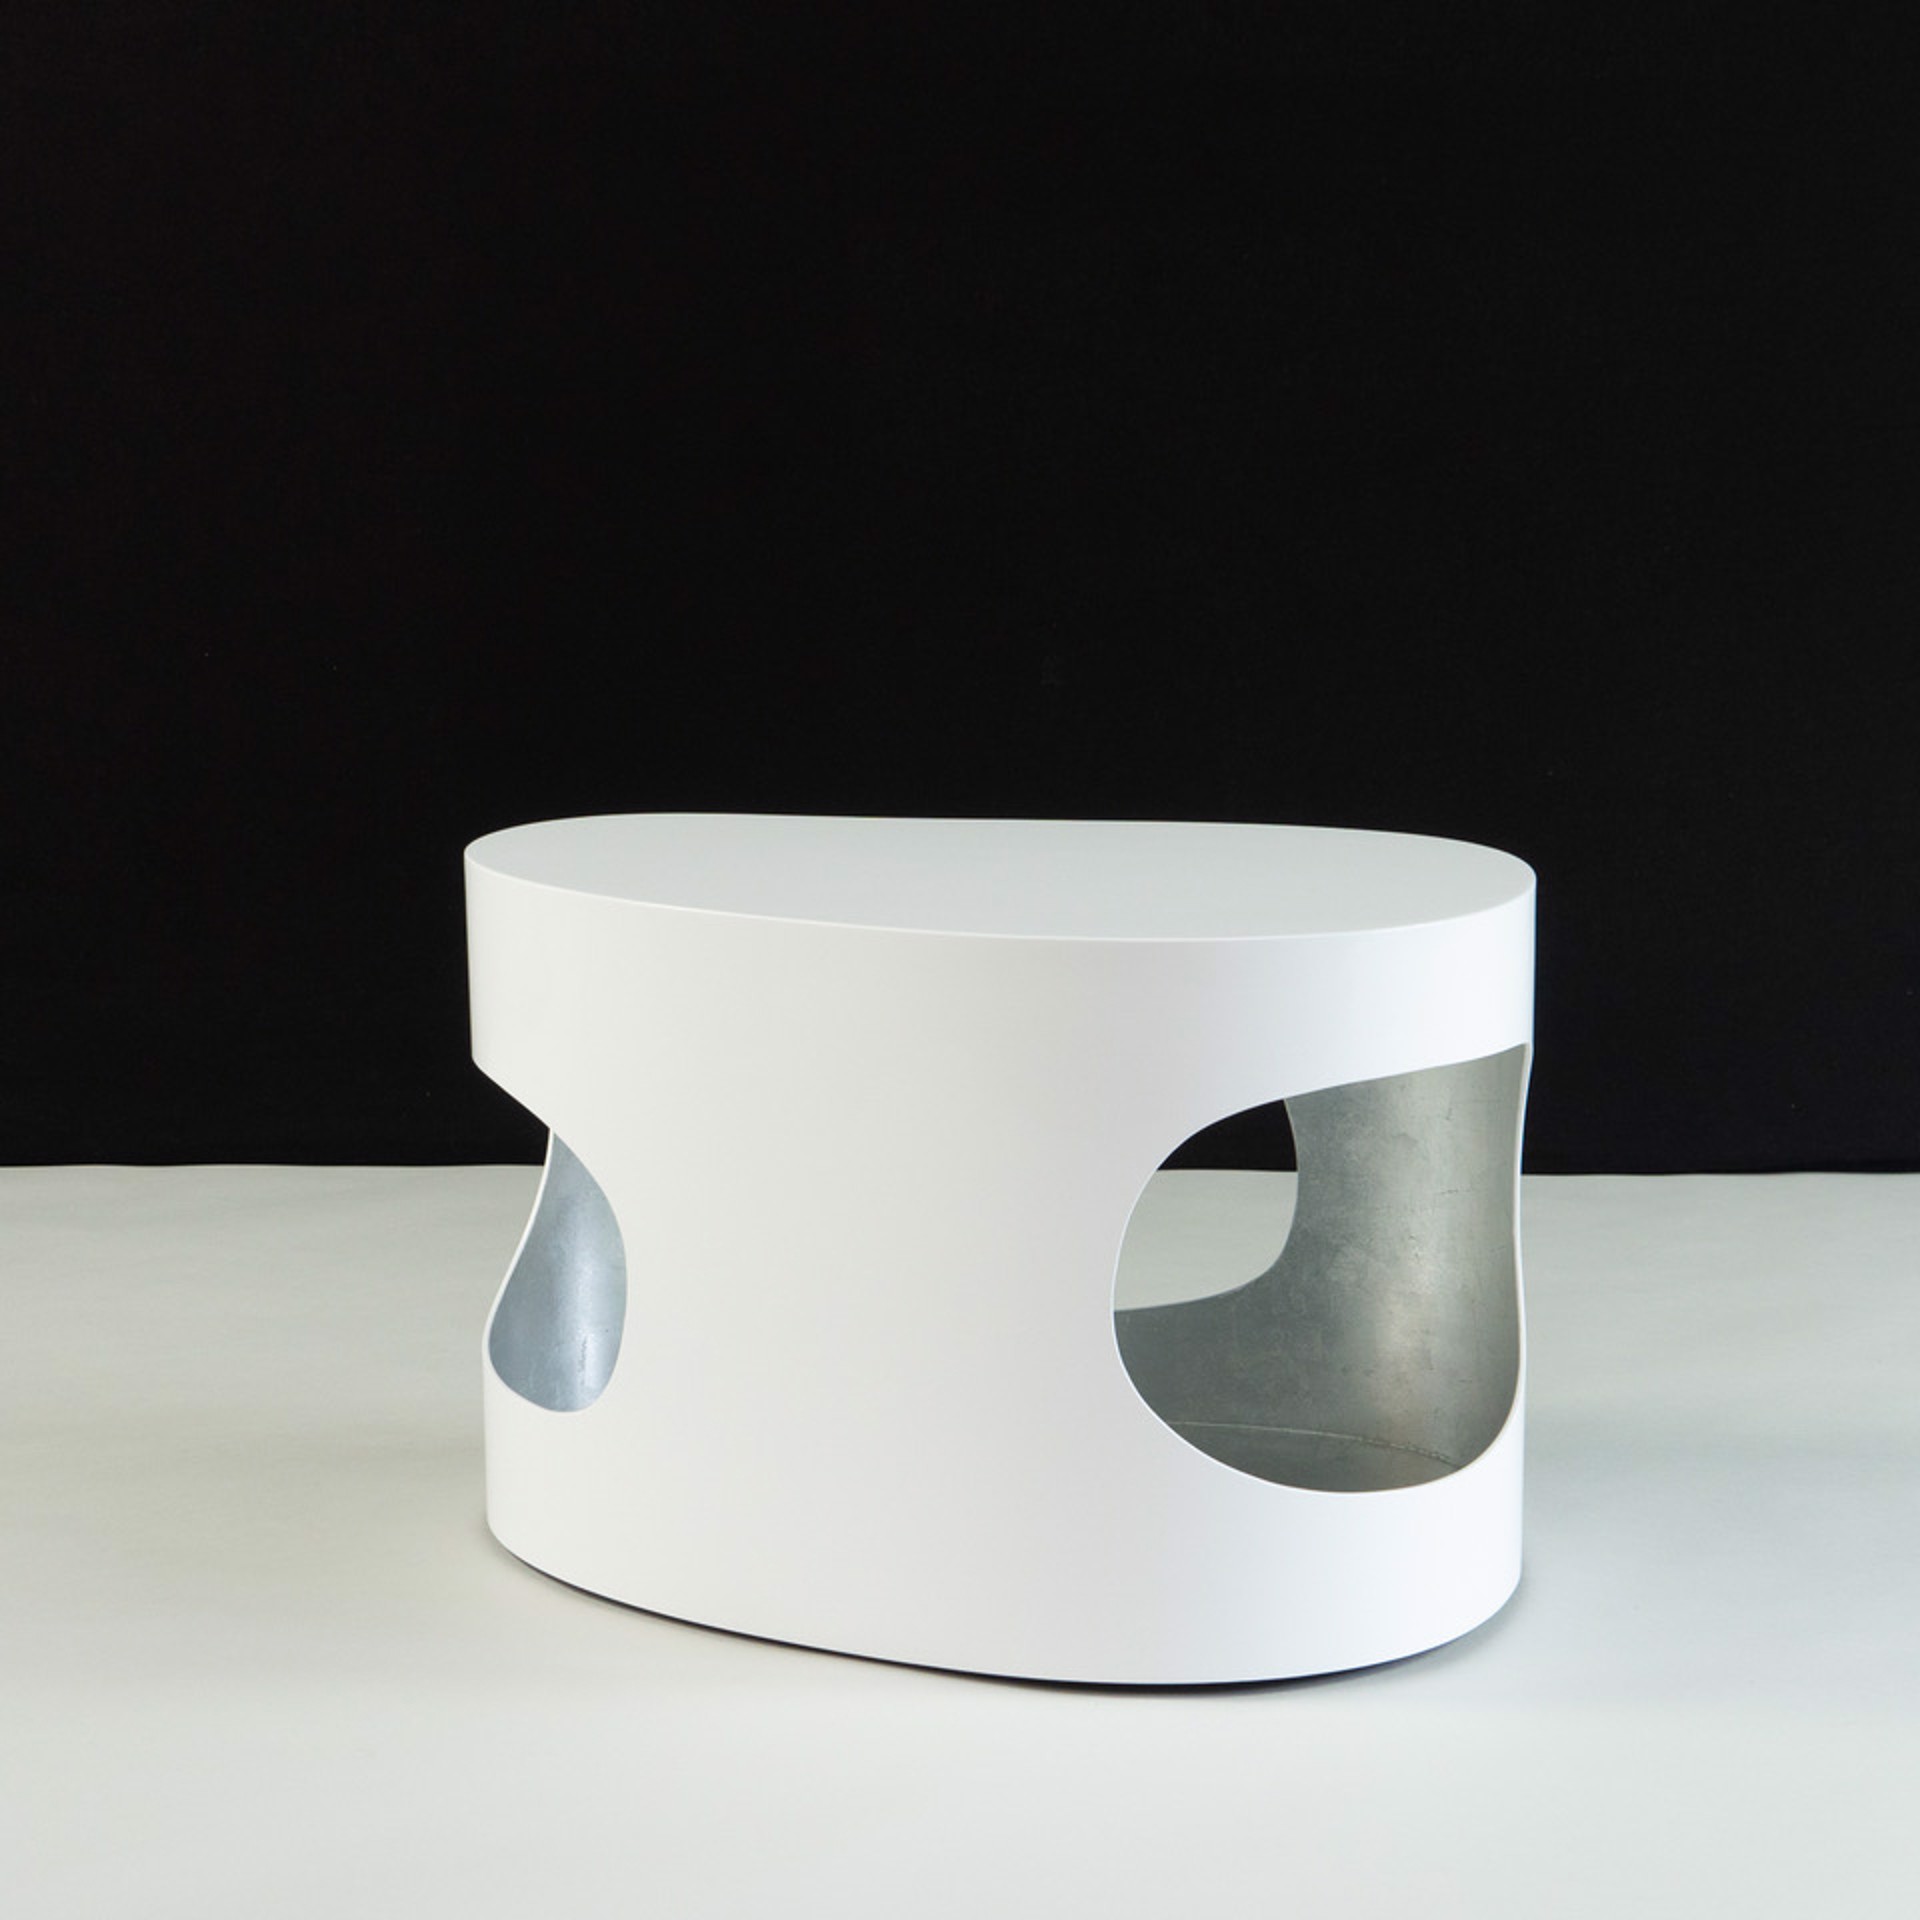 "Cloud" Small coffee table by Jacques Jarrige